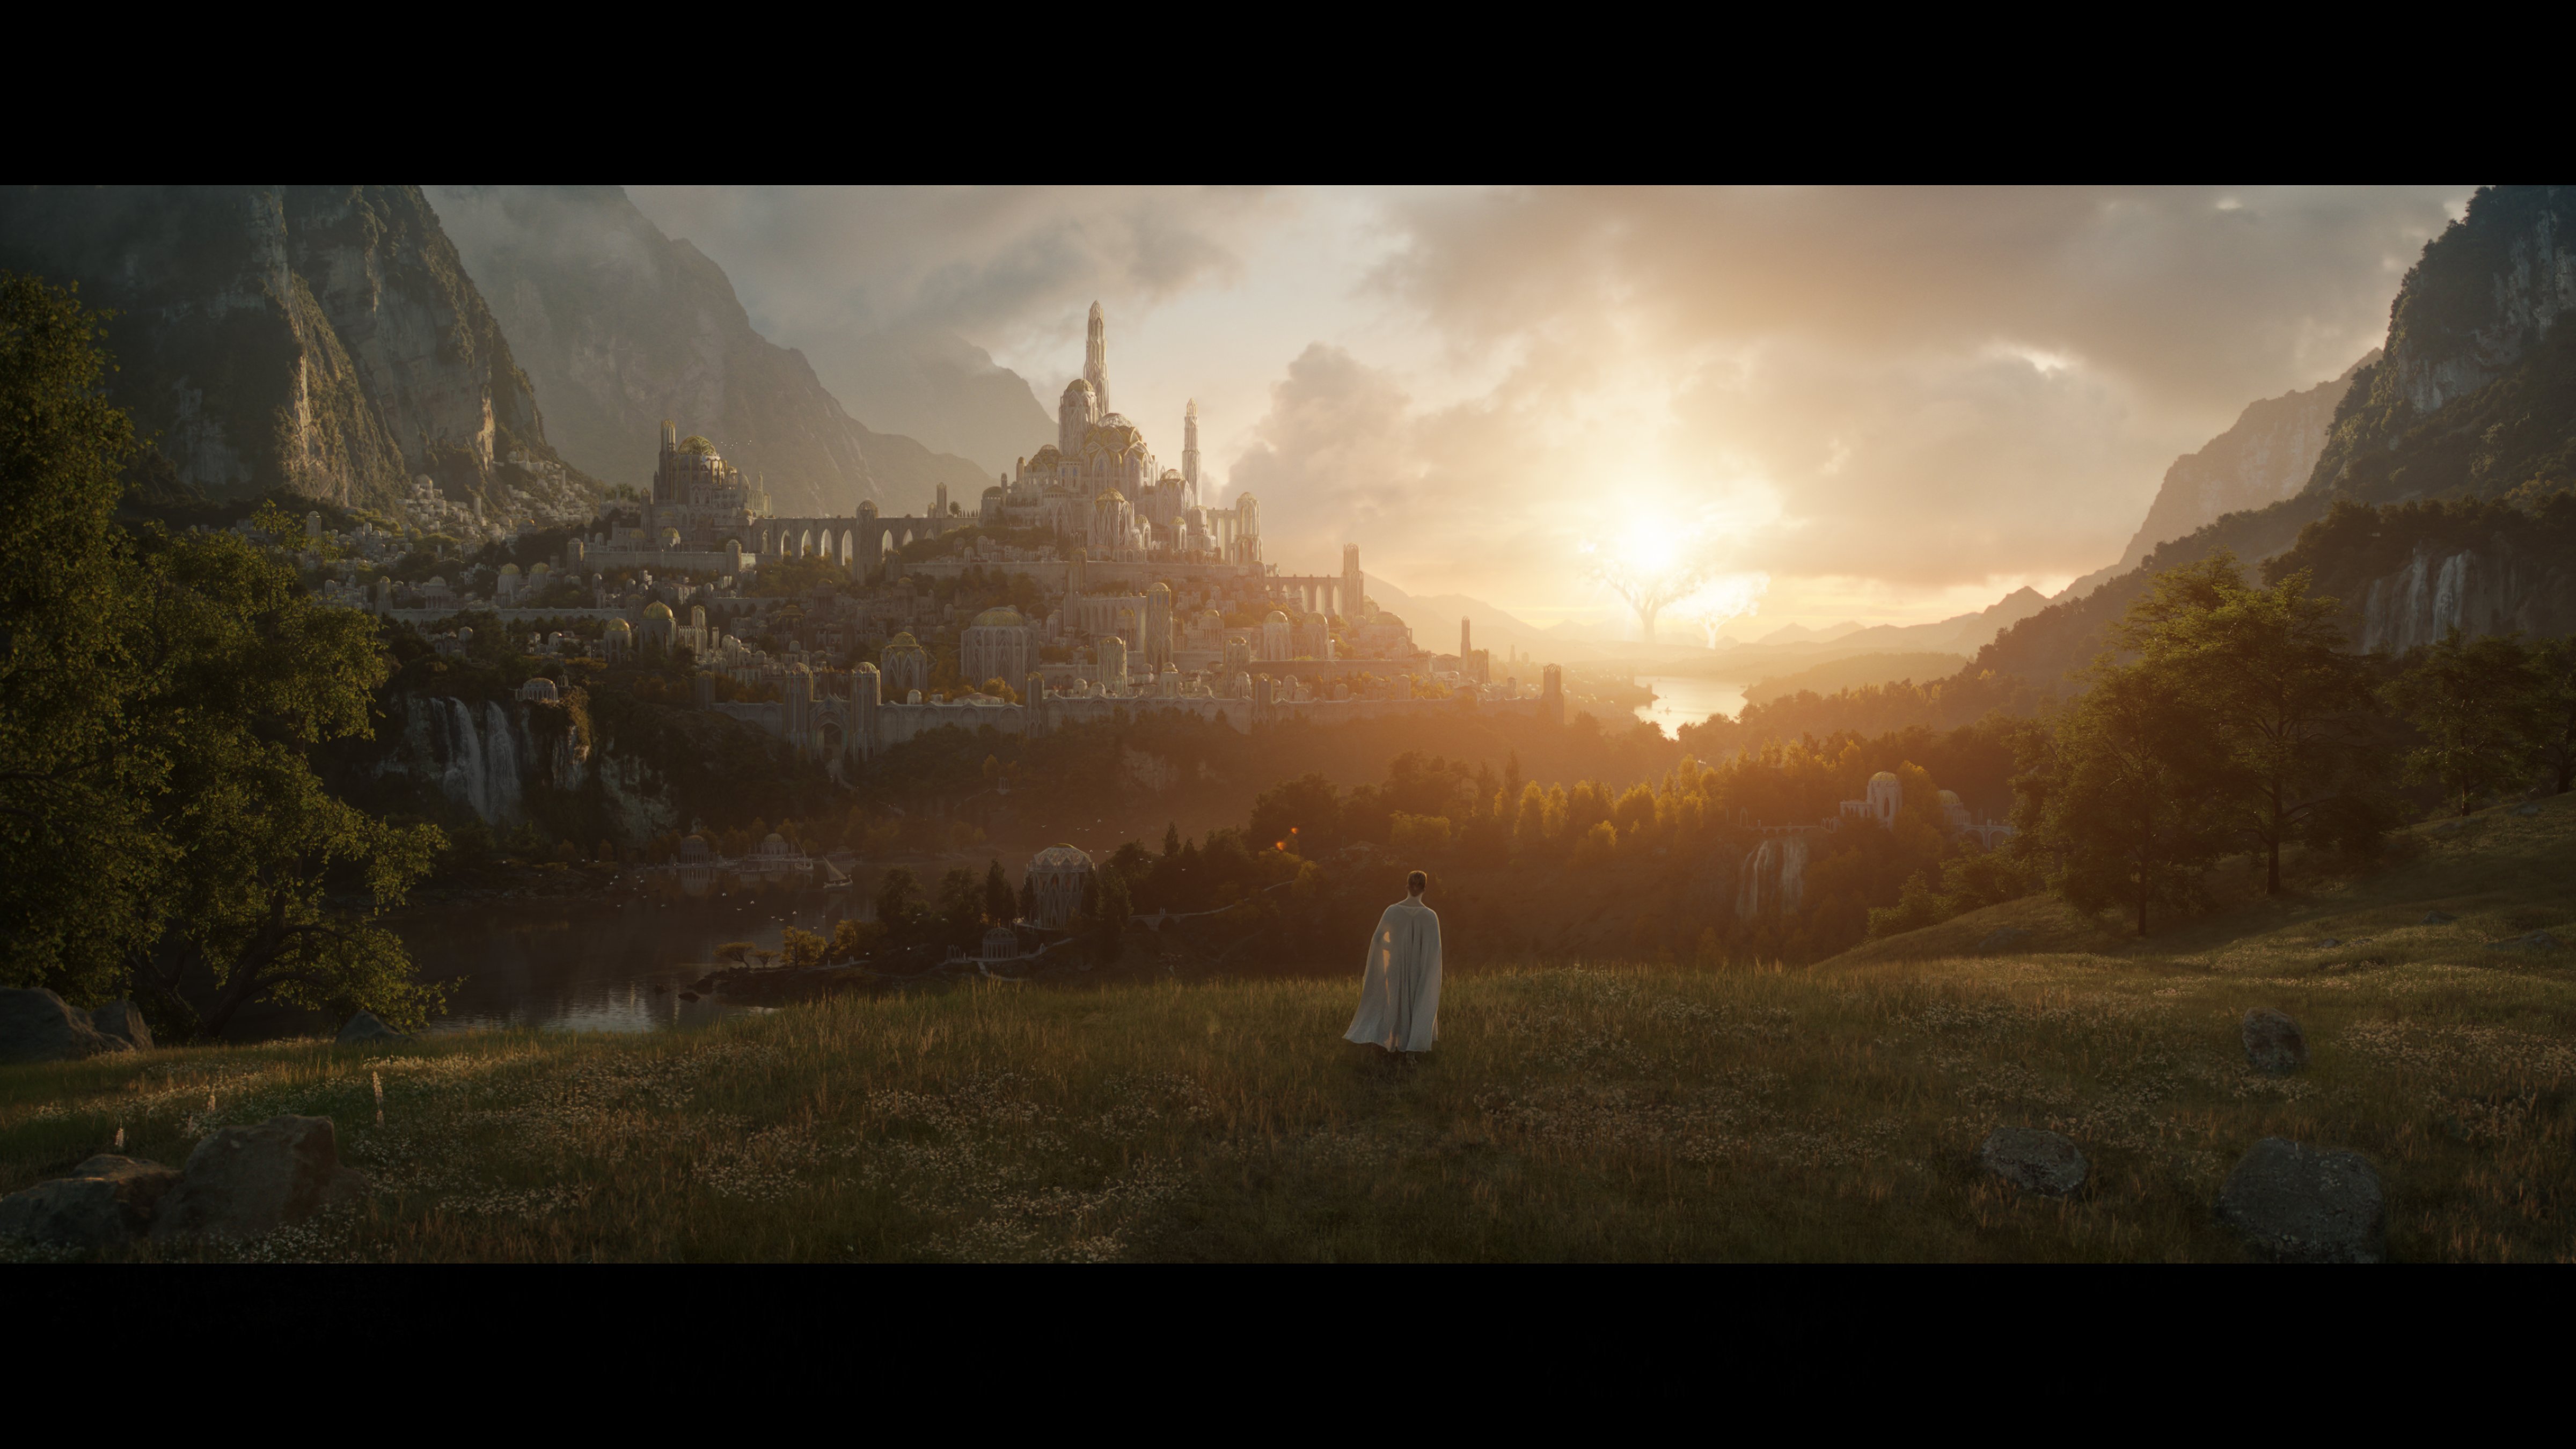 Amazon's first image from its <i>Lord of the Rings</i> television series (Amazon Studios)